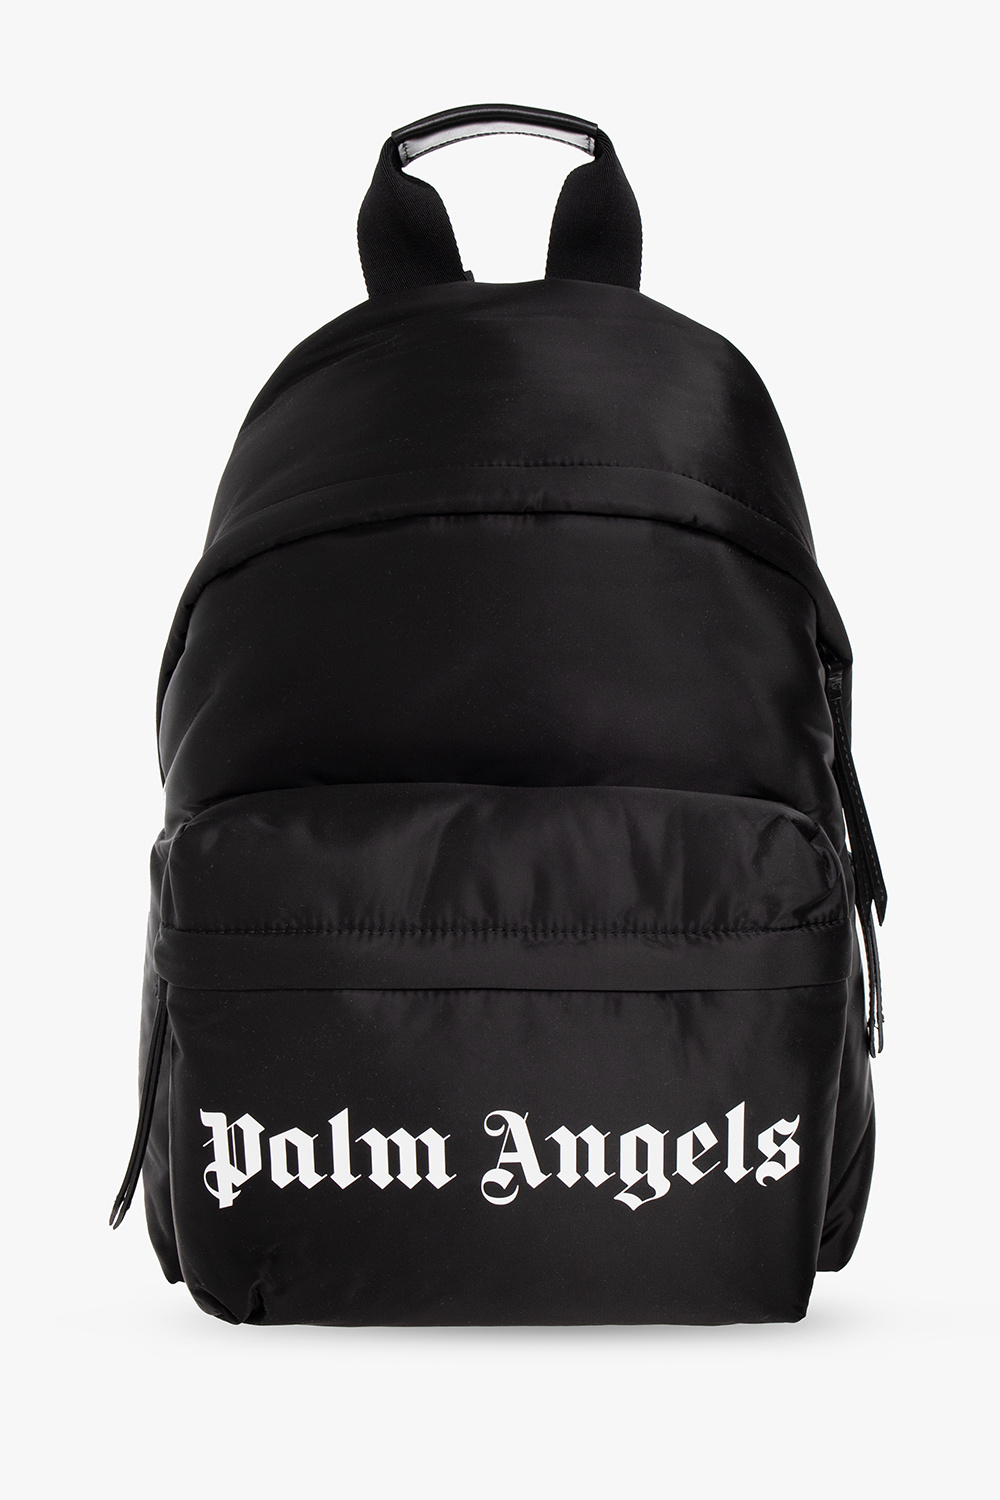 Palm Angels Backpack with logo | Men's Bags | Vitkac